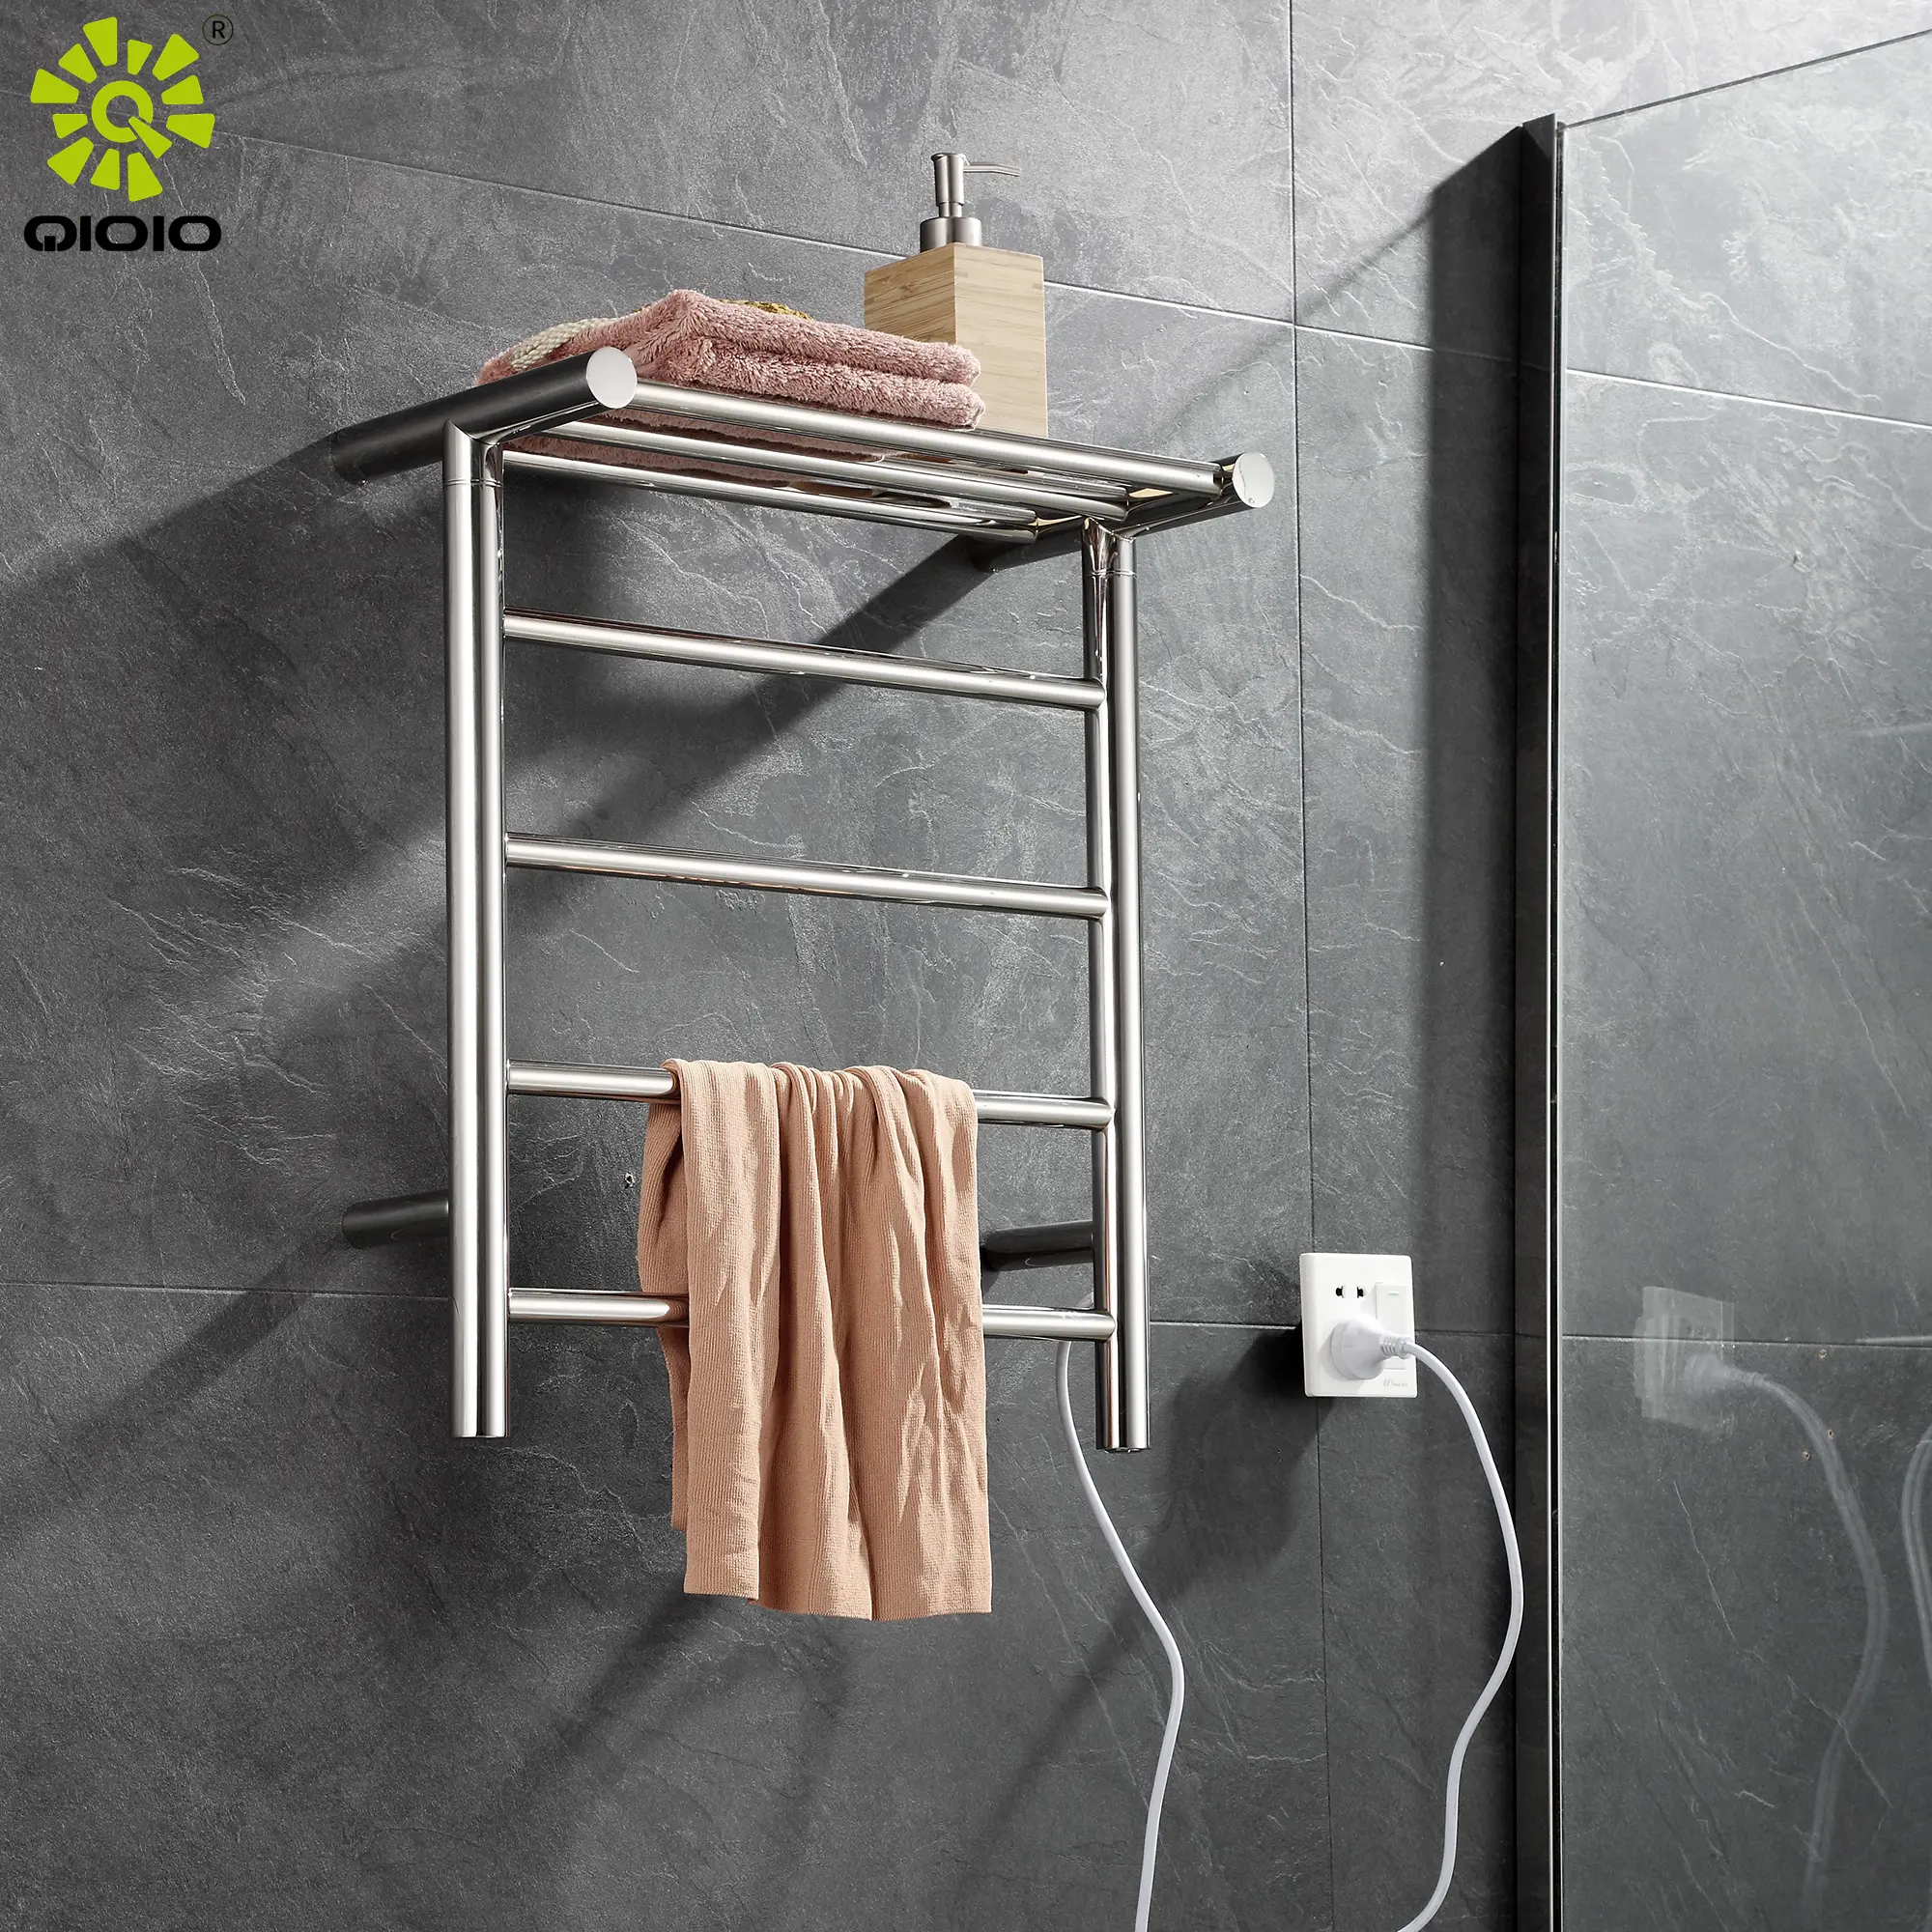 Qioio amazon square stainless steel drying towel rack intelligent thermostatic heated towel bars bathroom smart towel poles